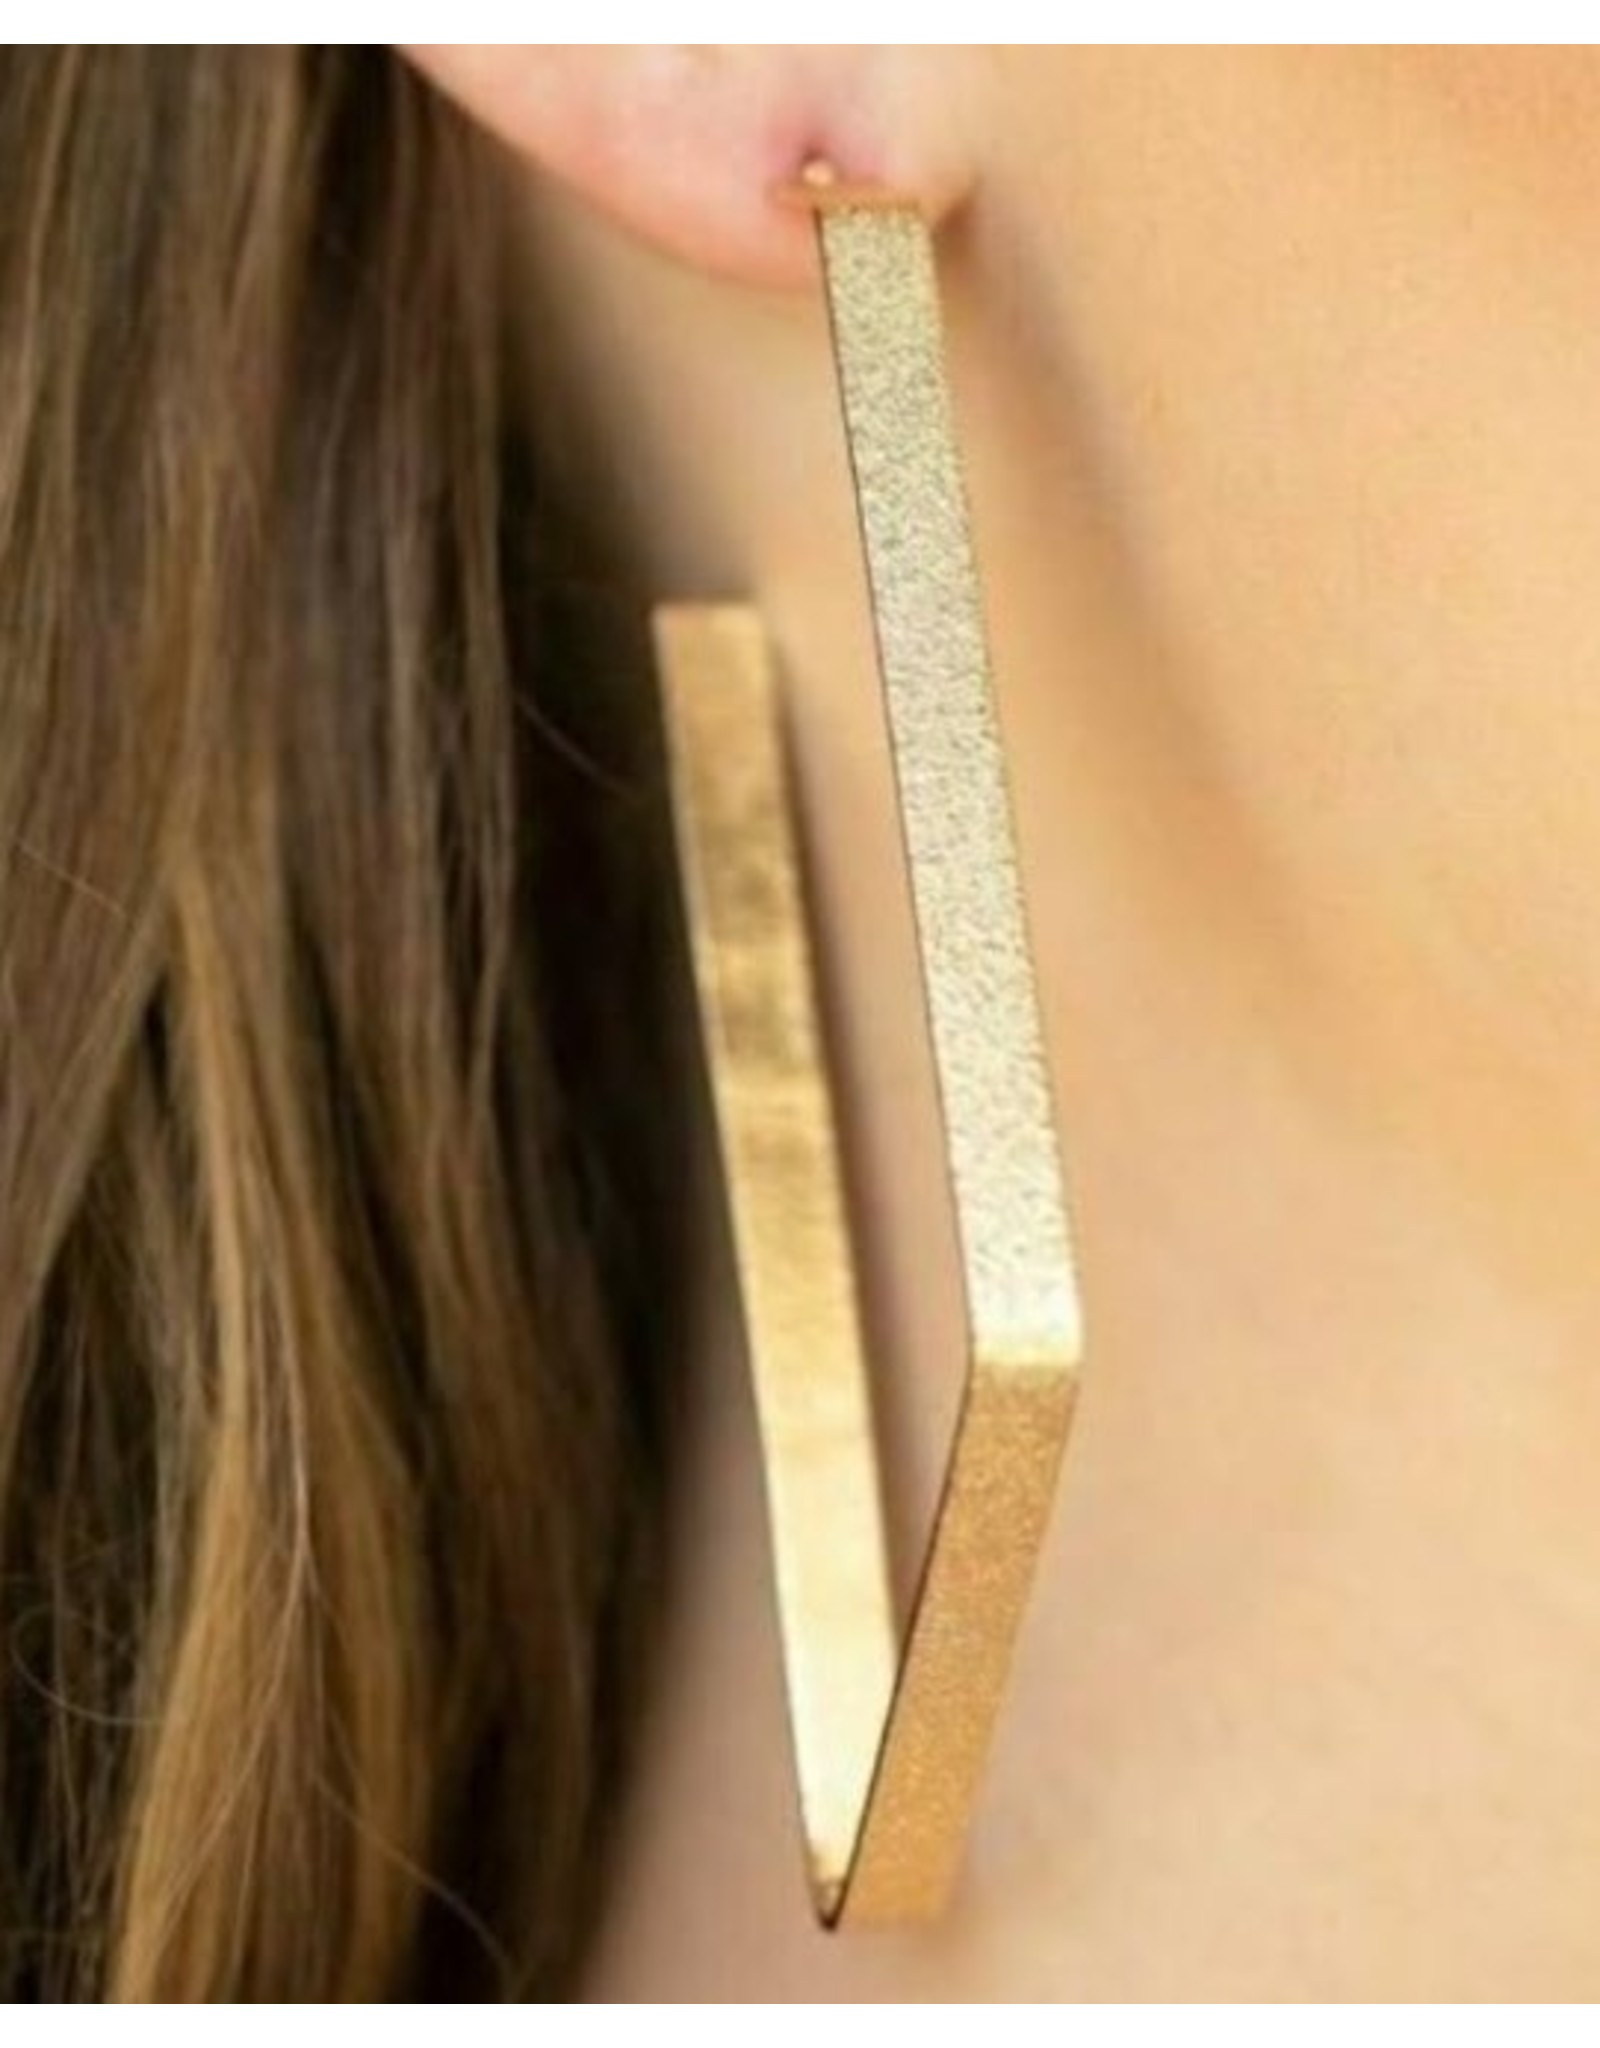 BELL'S BOUTIQUE Way Over the Edge Gold Earring